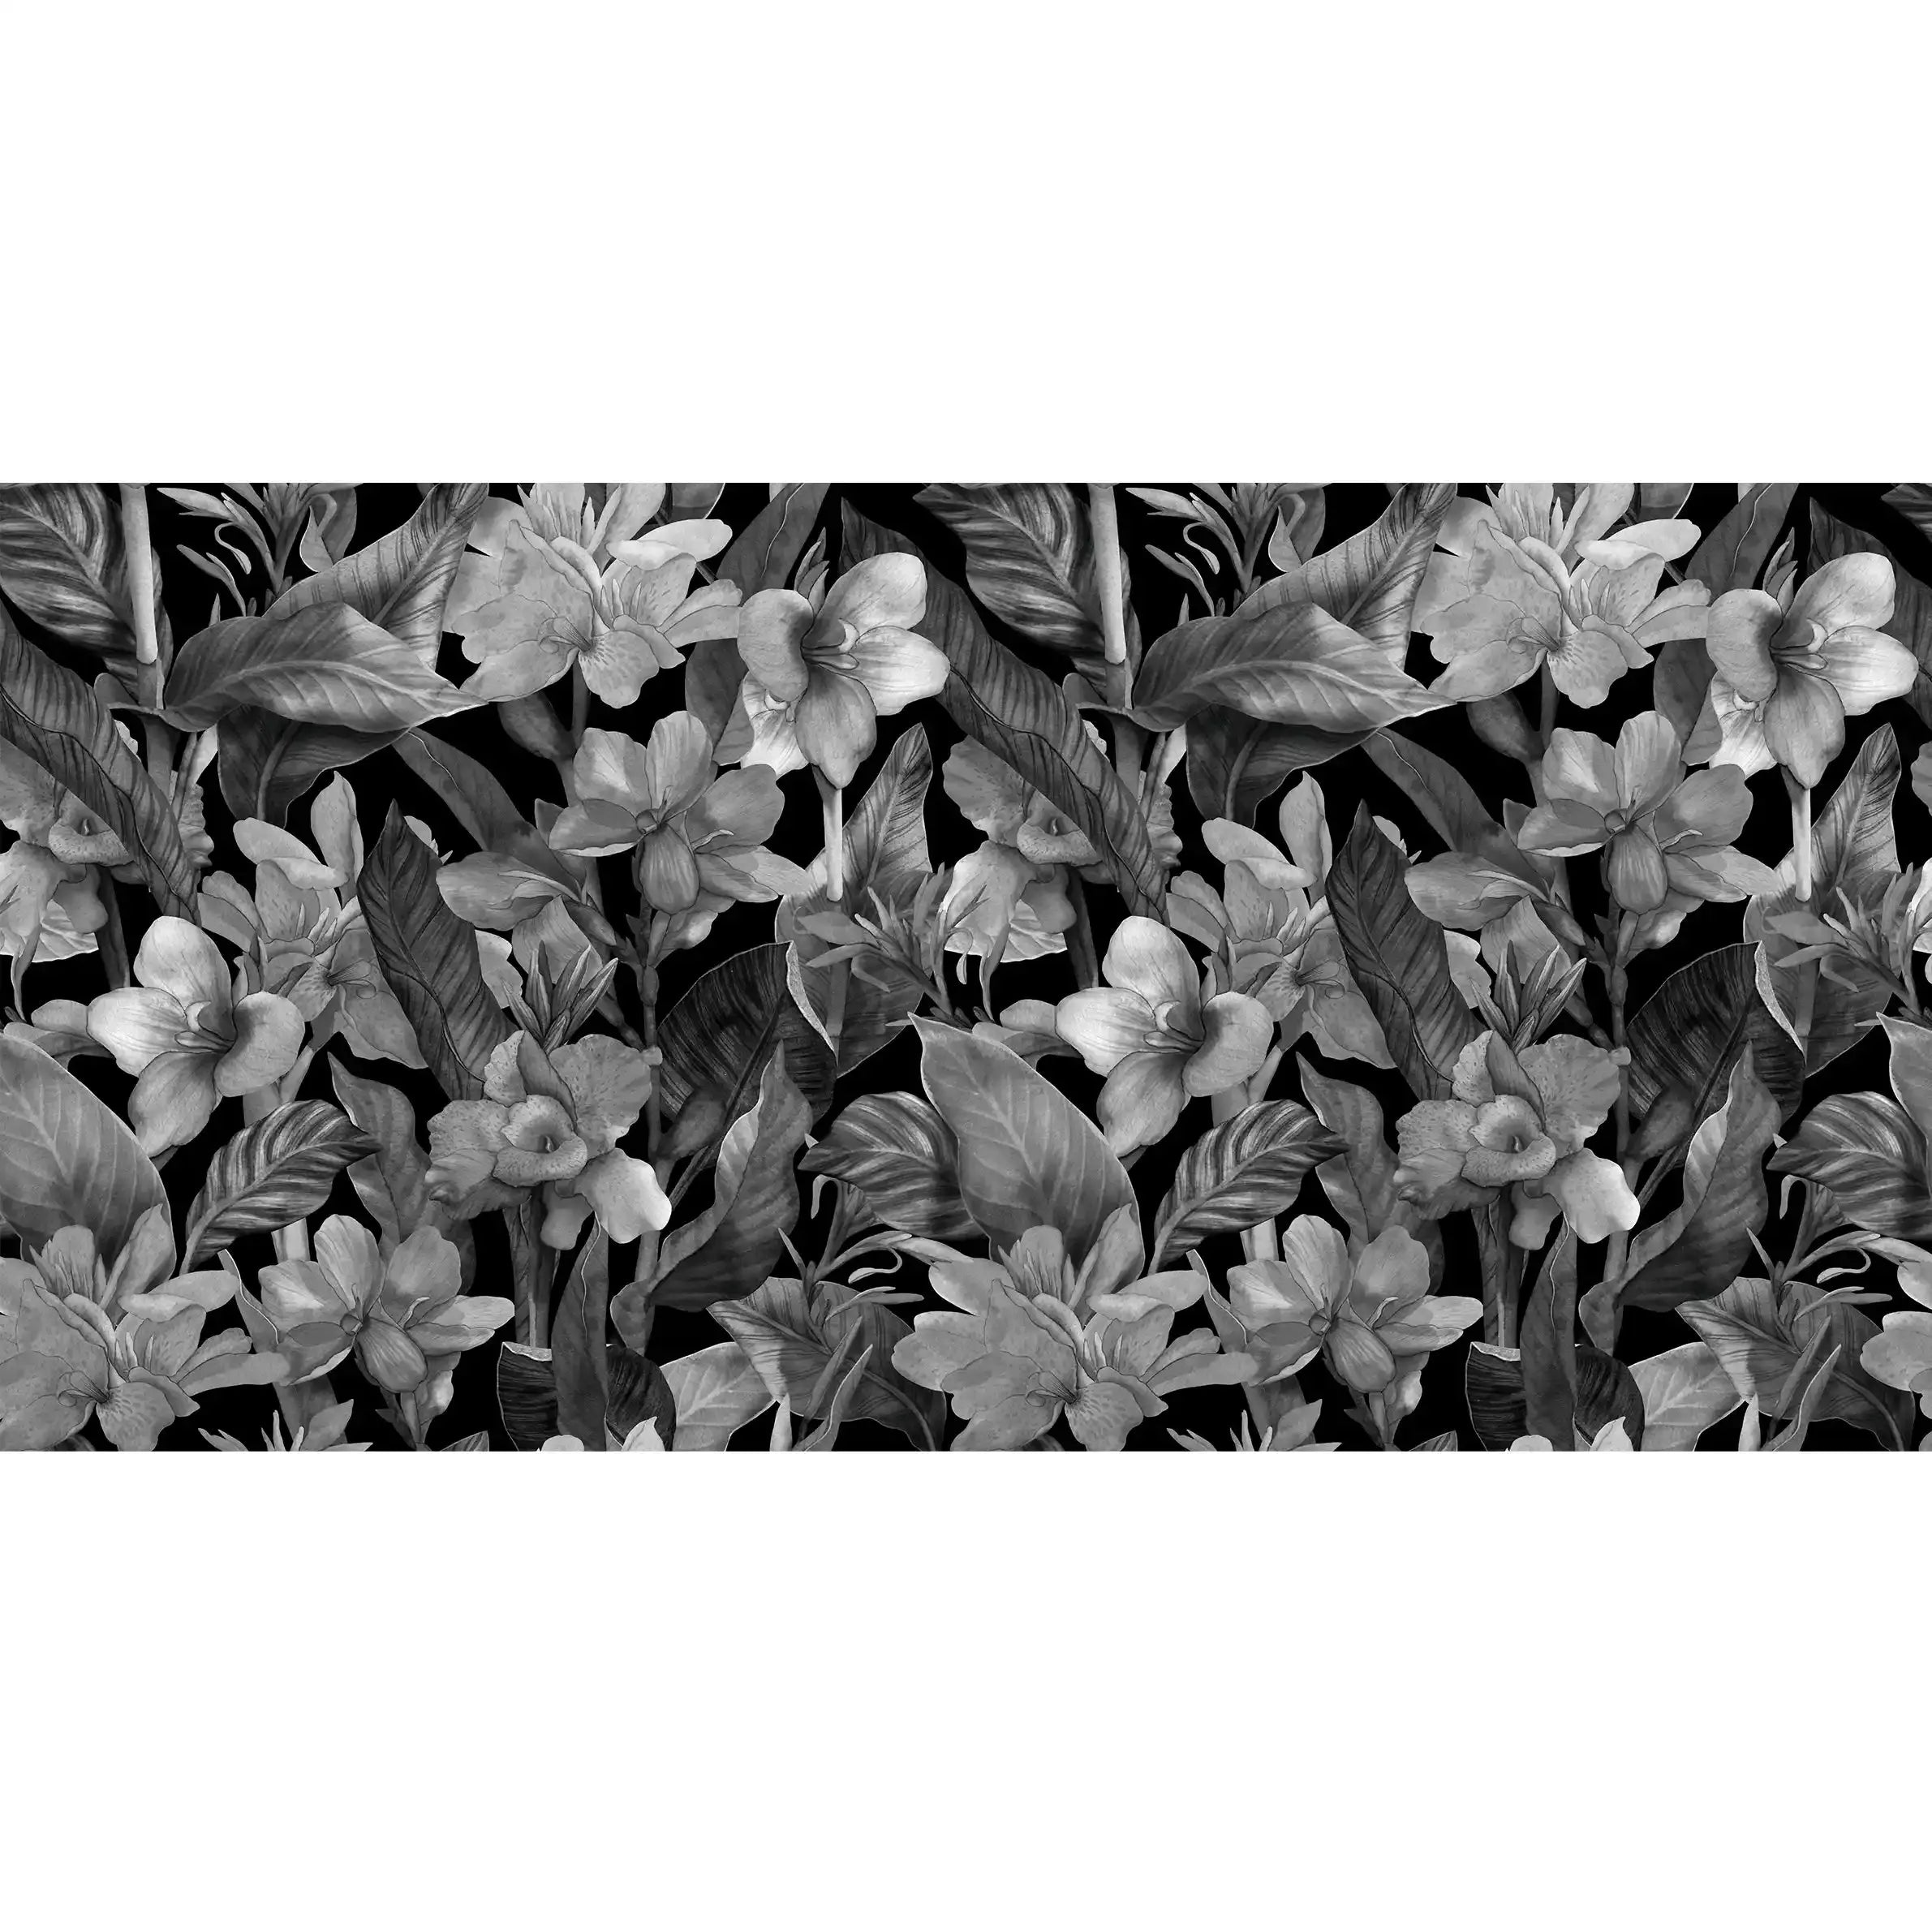 3074-E / Botanical Peel and Stick Wallpaper: Grey Floral & Black Leaf Pattern, Perfect for Accent Wall Decor - Artevella